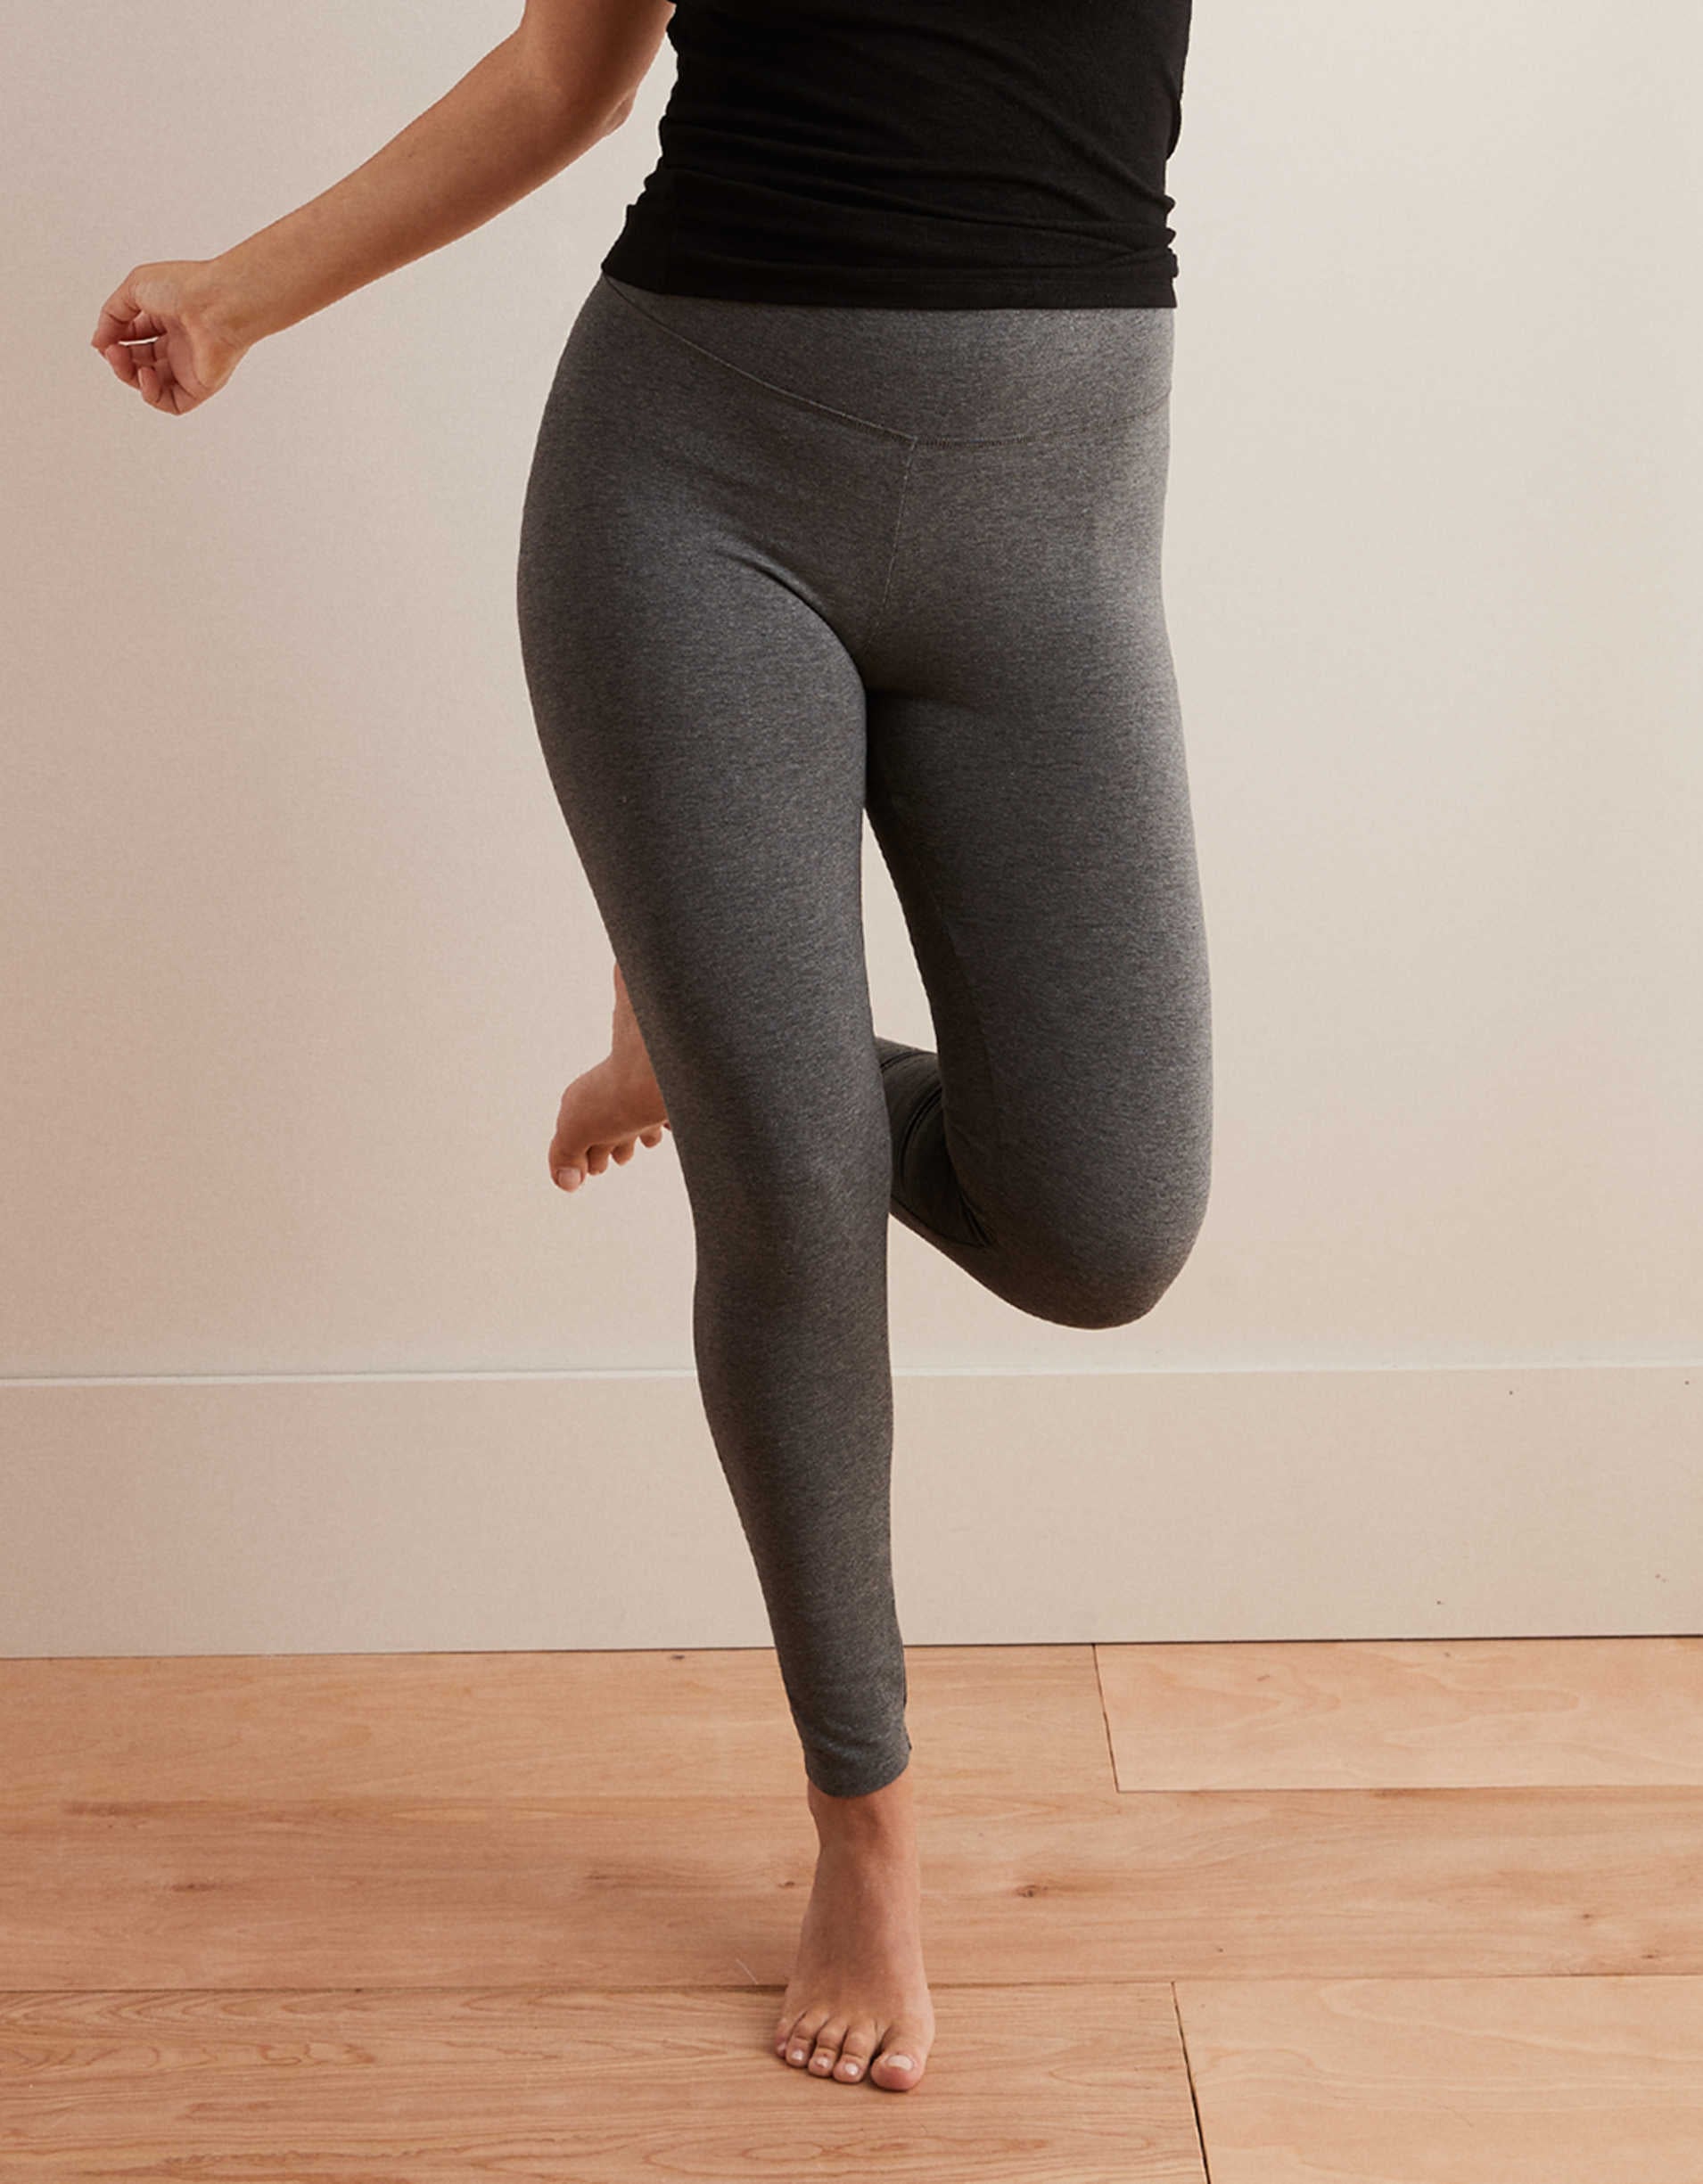 Aerie Play Pocket High Waisted Legging by Play in our Feel Balanced fabric, Shop the Aerie Play Pock…